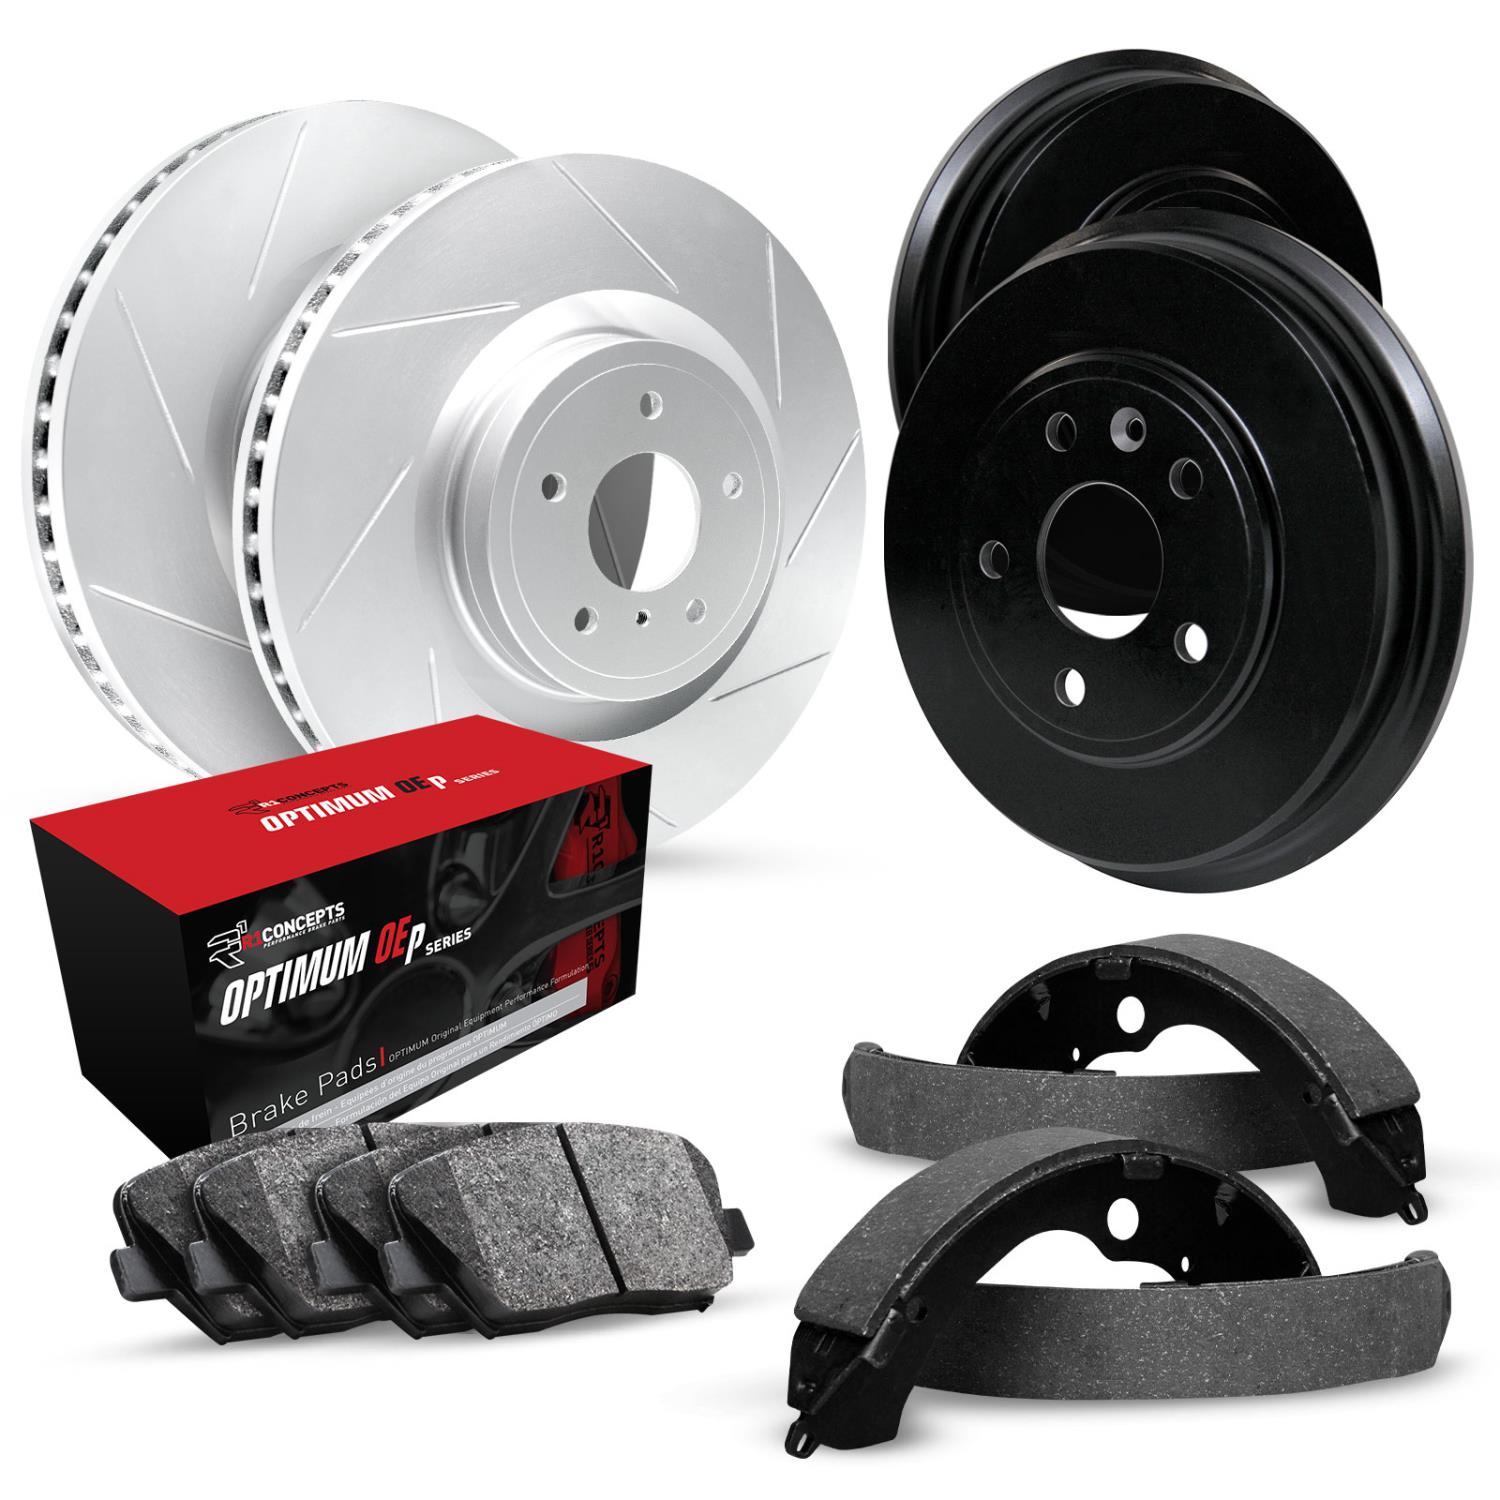 GEO-Carbon Slotted Brake Rotor & Drum Set w/Optimum OE Pads & Shoes, 1971-1990 GM, Position: Front & Rear